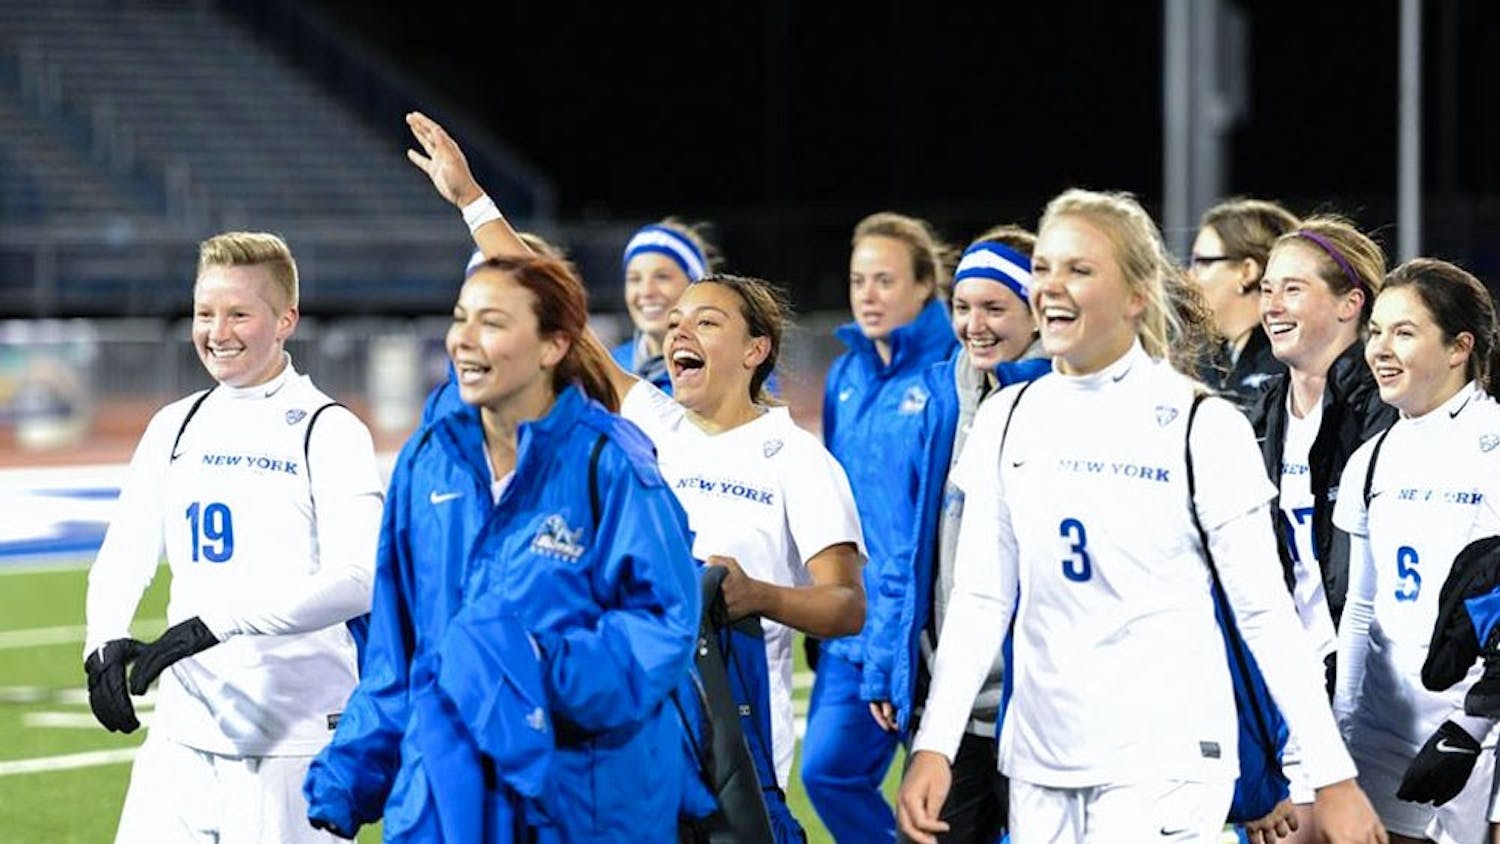 Members of the 2015-16 UB women's soccer team celebrate after a matchup in the MAC Tournament. Kay players will not return next year, but a solid spring season leaves Shawn Burke relaxed about replacing them.&nbsp;